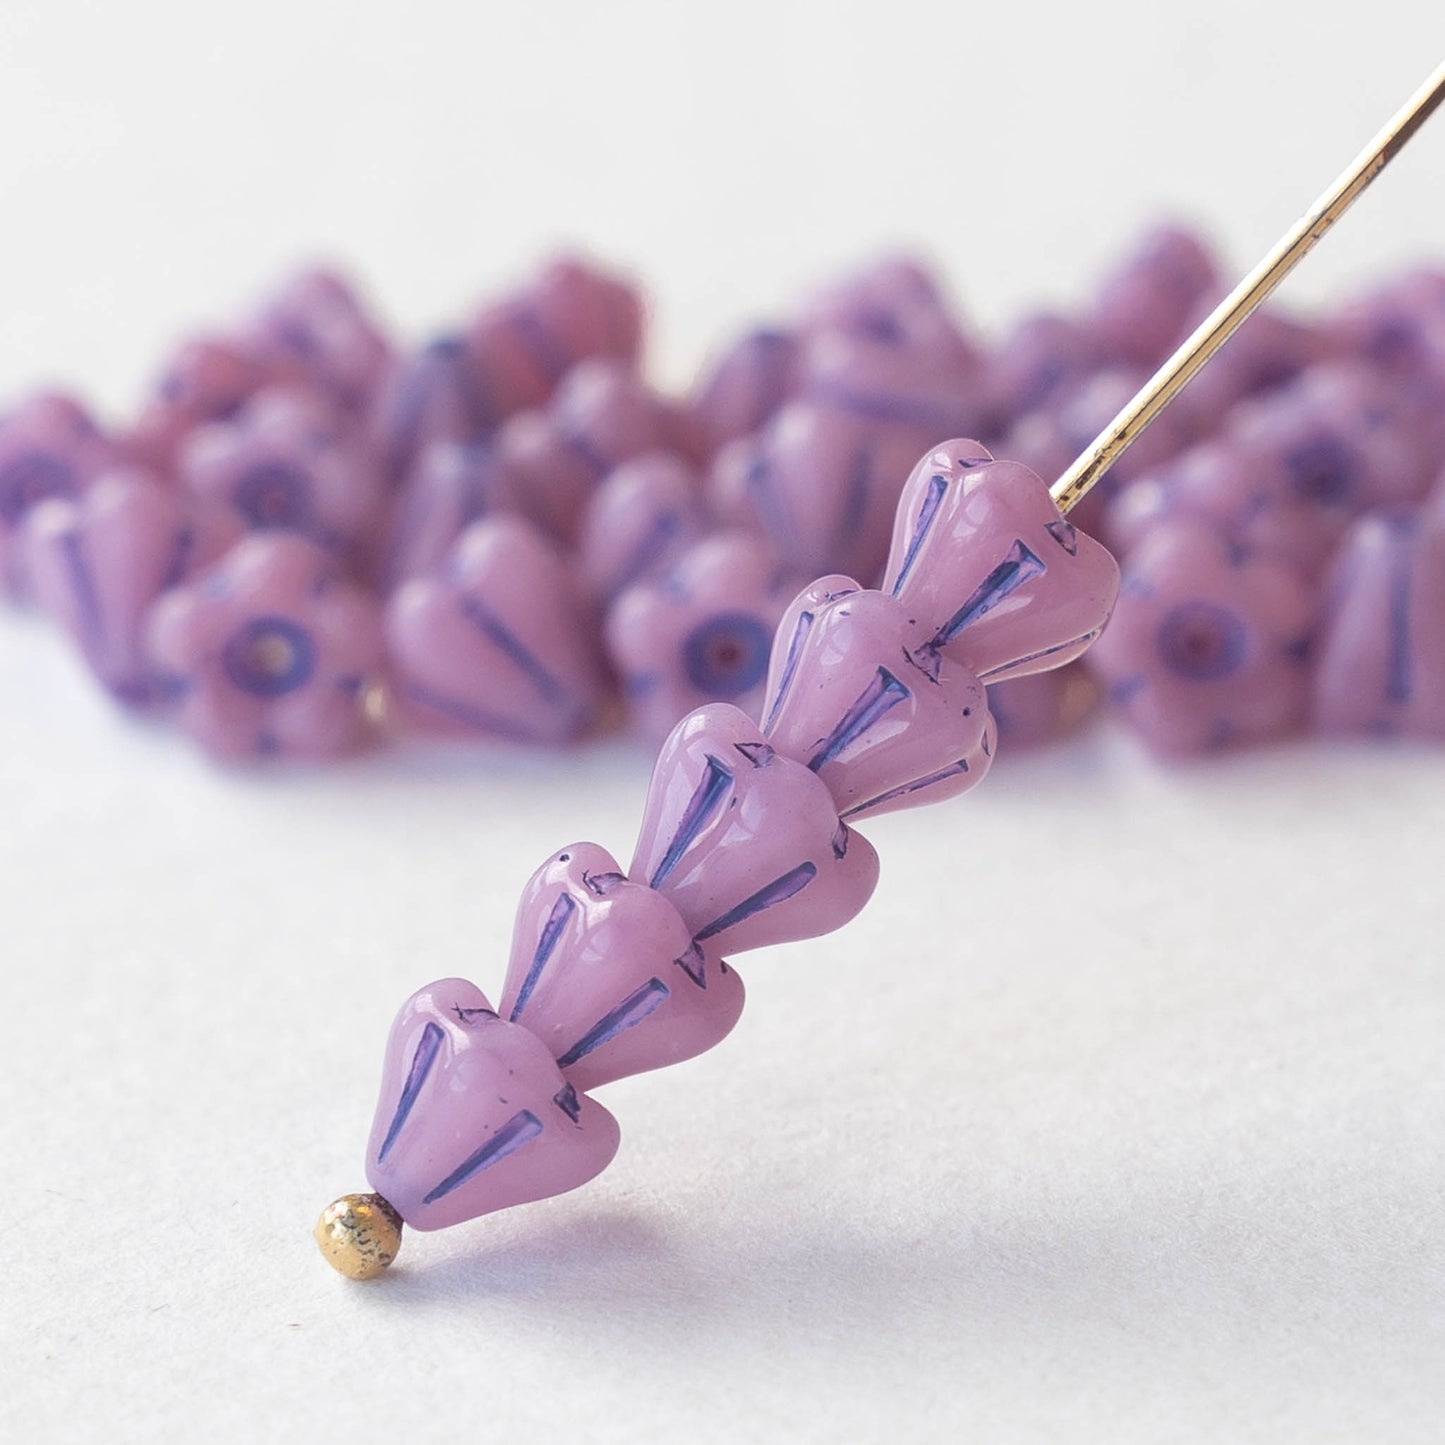 4x6mm Bell Flower Beads - Lavender with Blue - 30 Beads